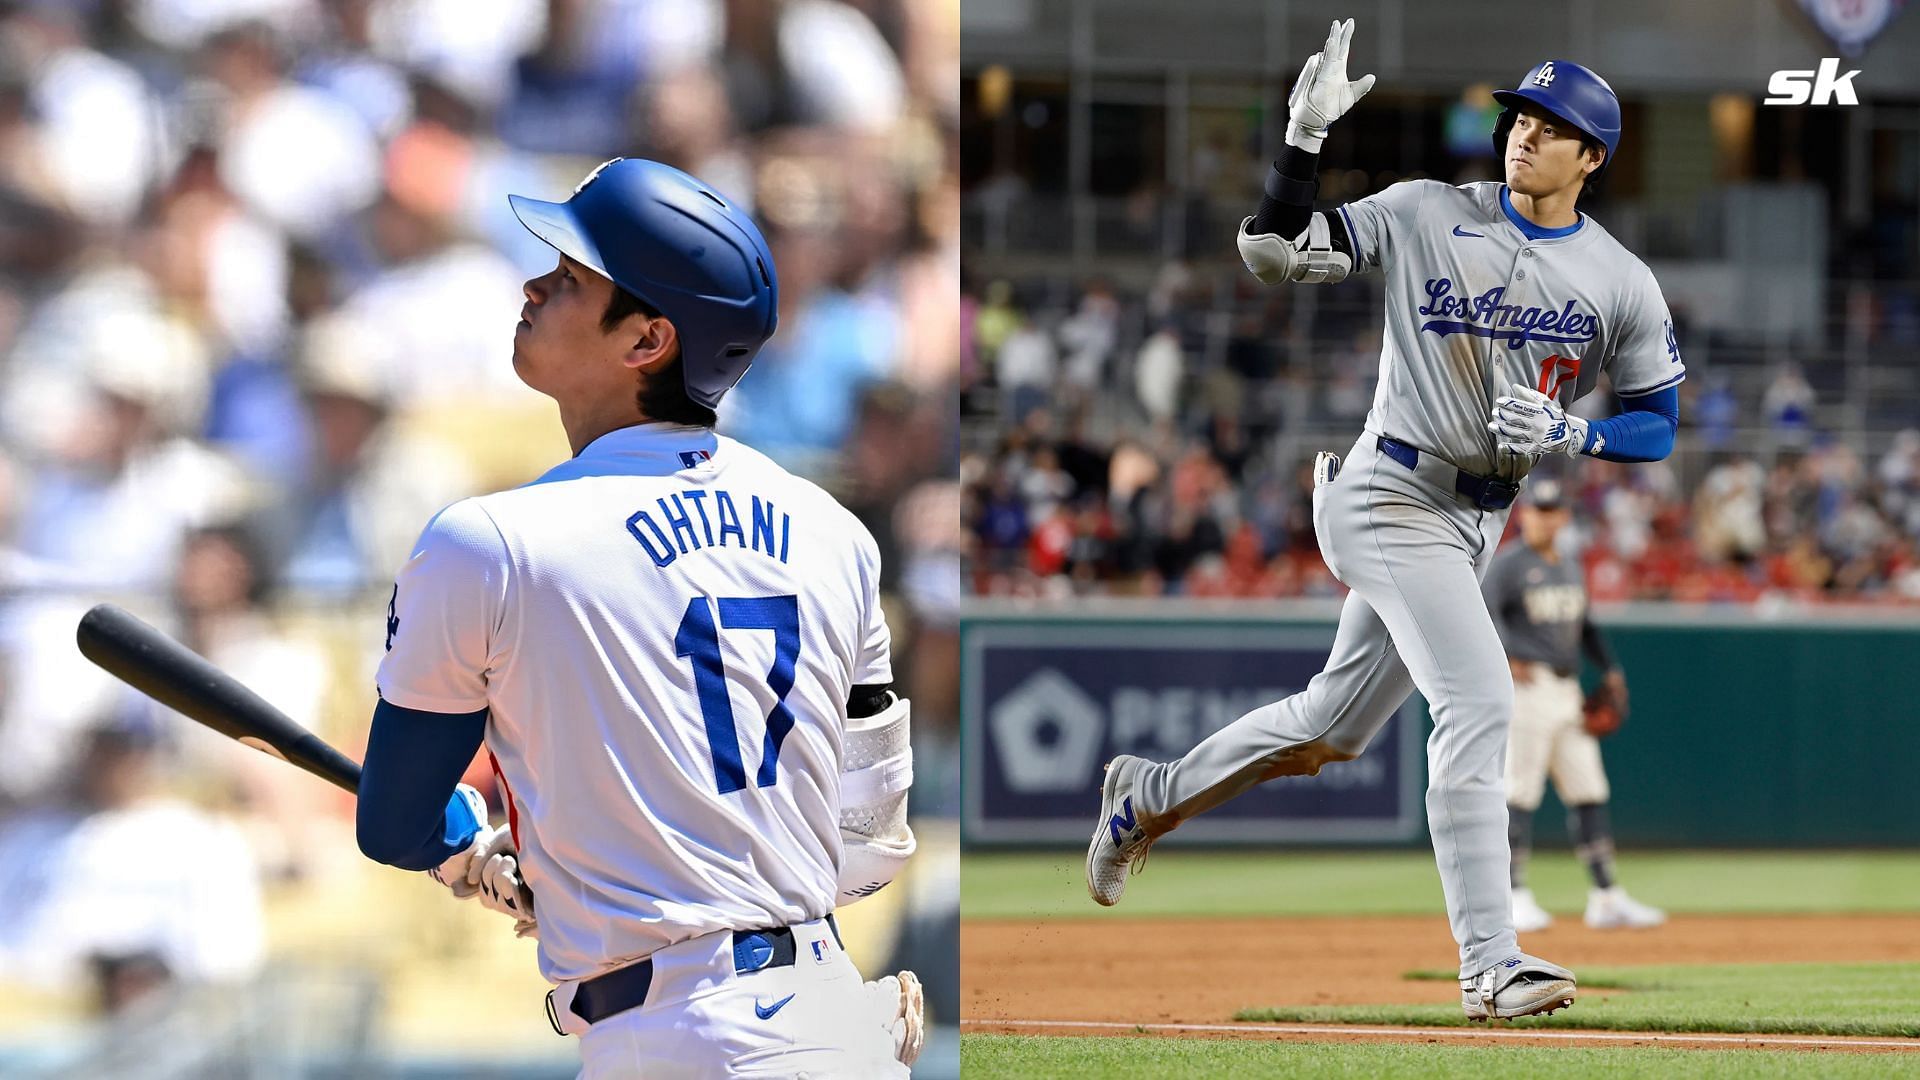 WATCH: Dodgers superstar Shohei Ohtani hits home run in first at-bat after being booed by Blue Jays fans